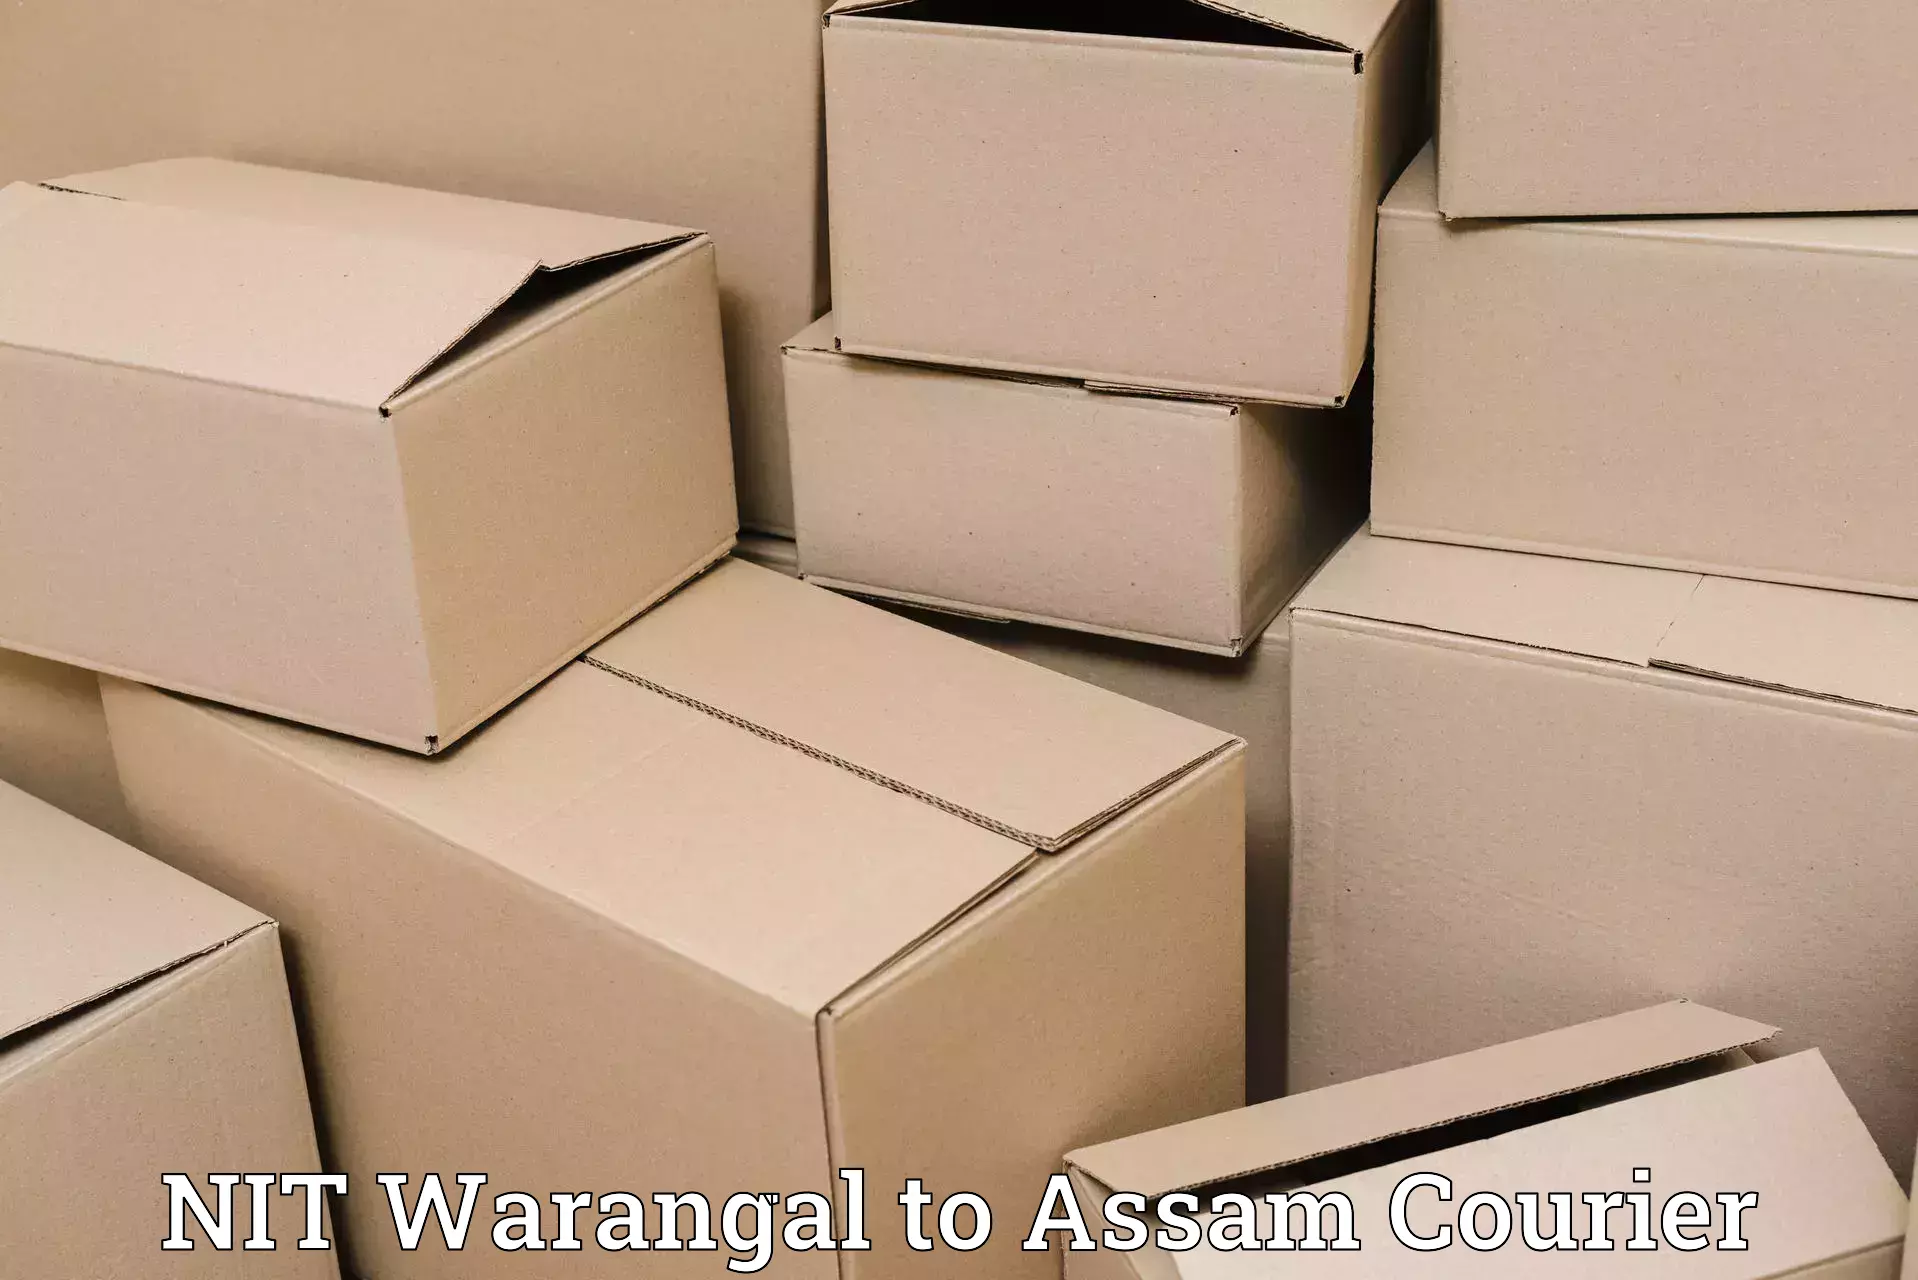 Advanced delivery network NIT Warangal to Assam